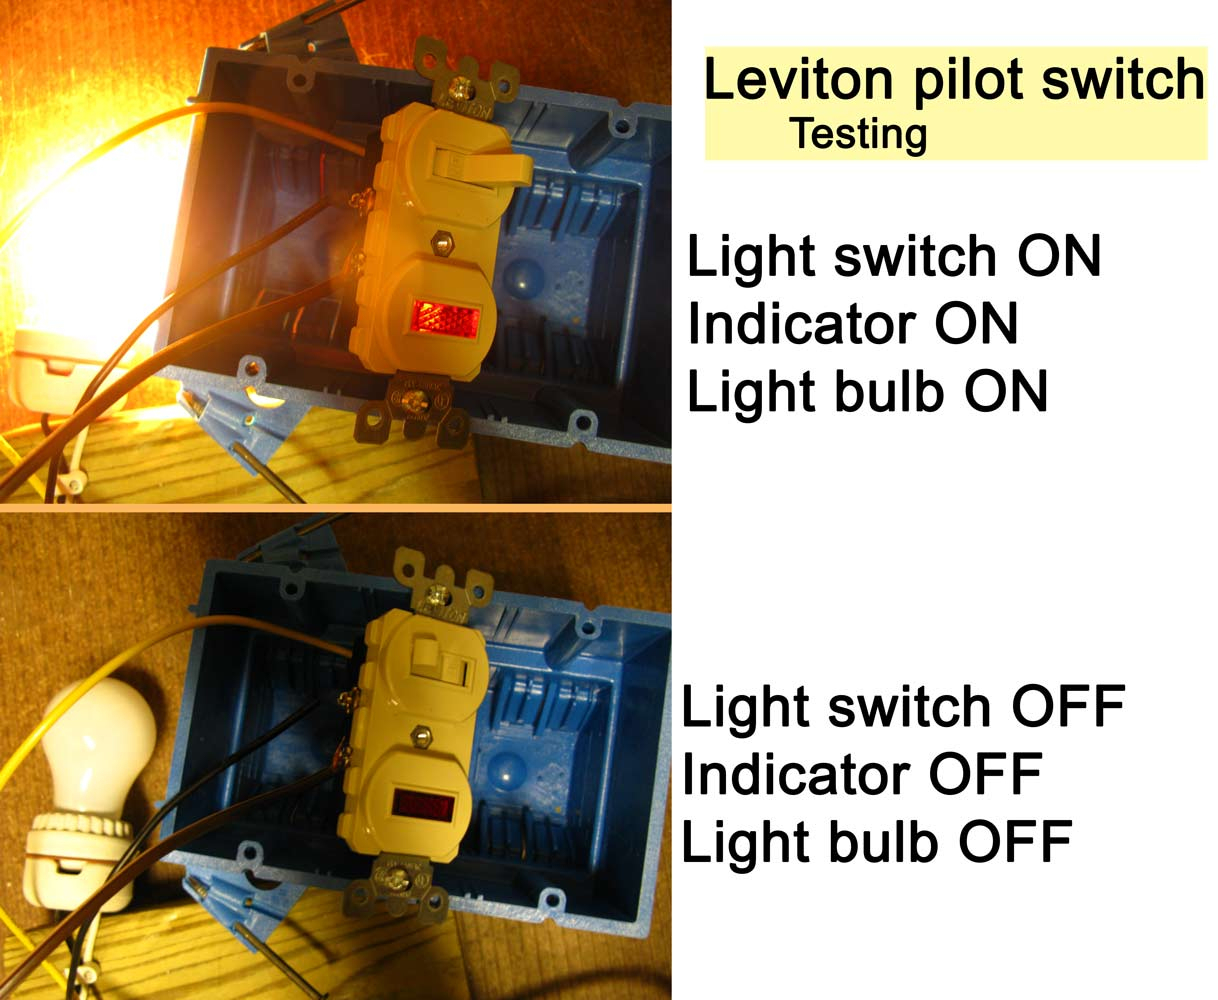 How To Wire Cooper 277 Pilot Light Switch - Leviton 3 Way Dimmer Switch Wiring Diagram